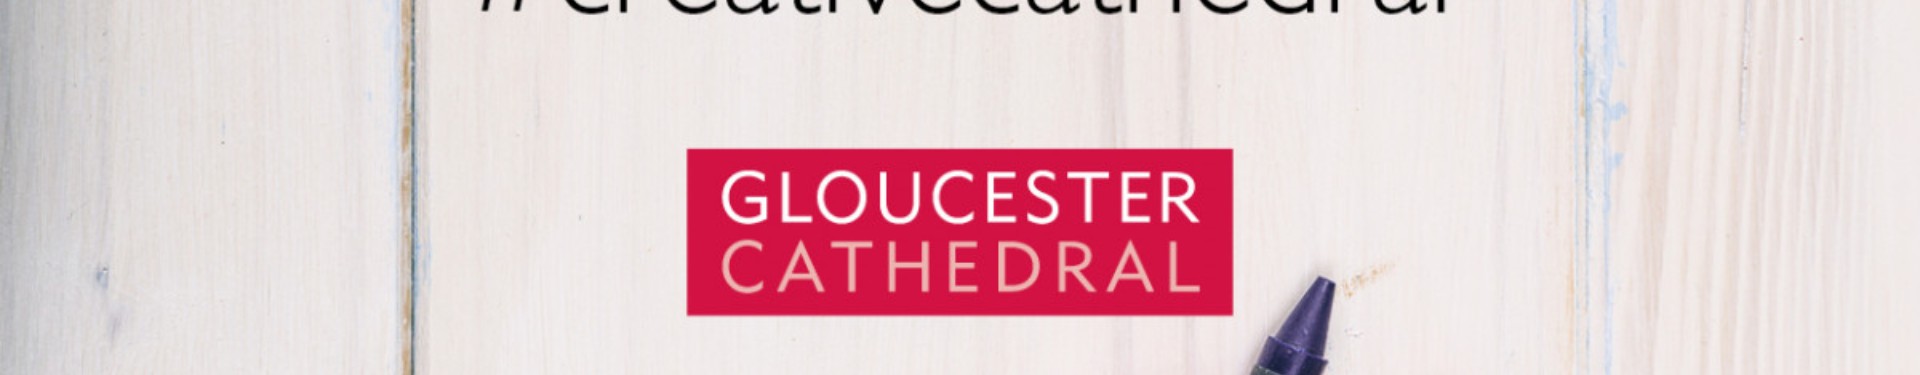 banner saying 'Gloucester cathedral'